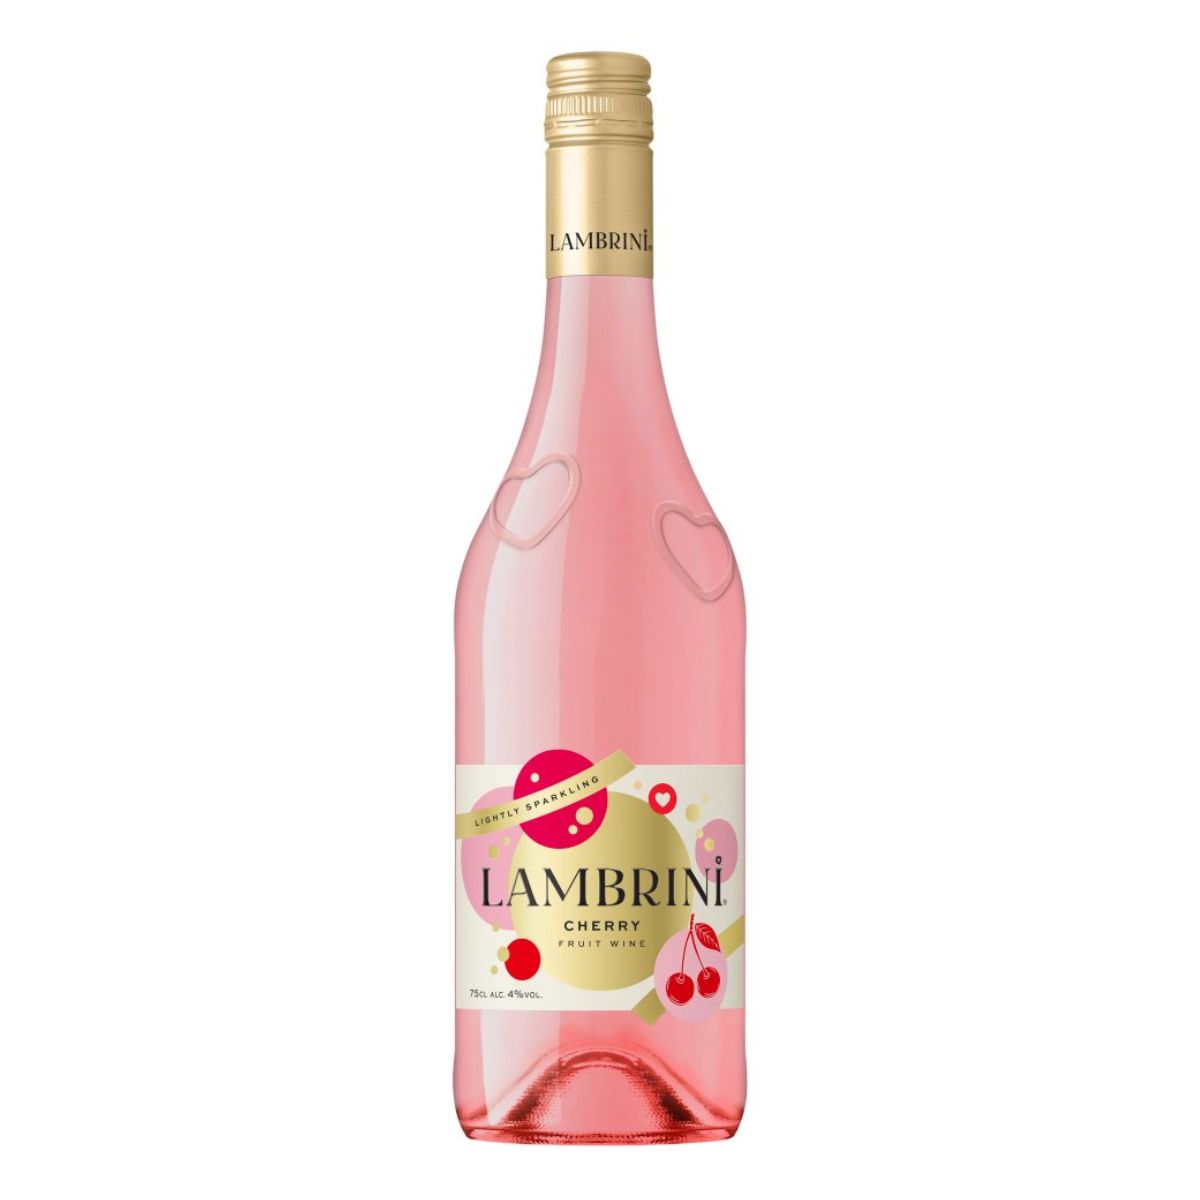 A bottle of Lambrini - Cherry (4.0% ABV) - 750ml on a white background.